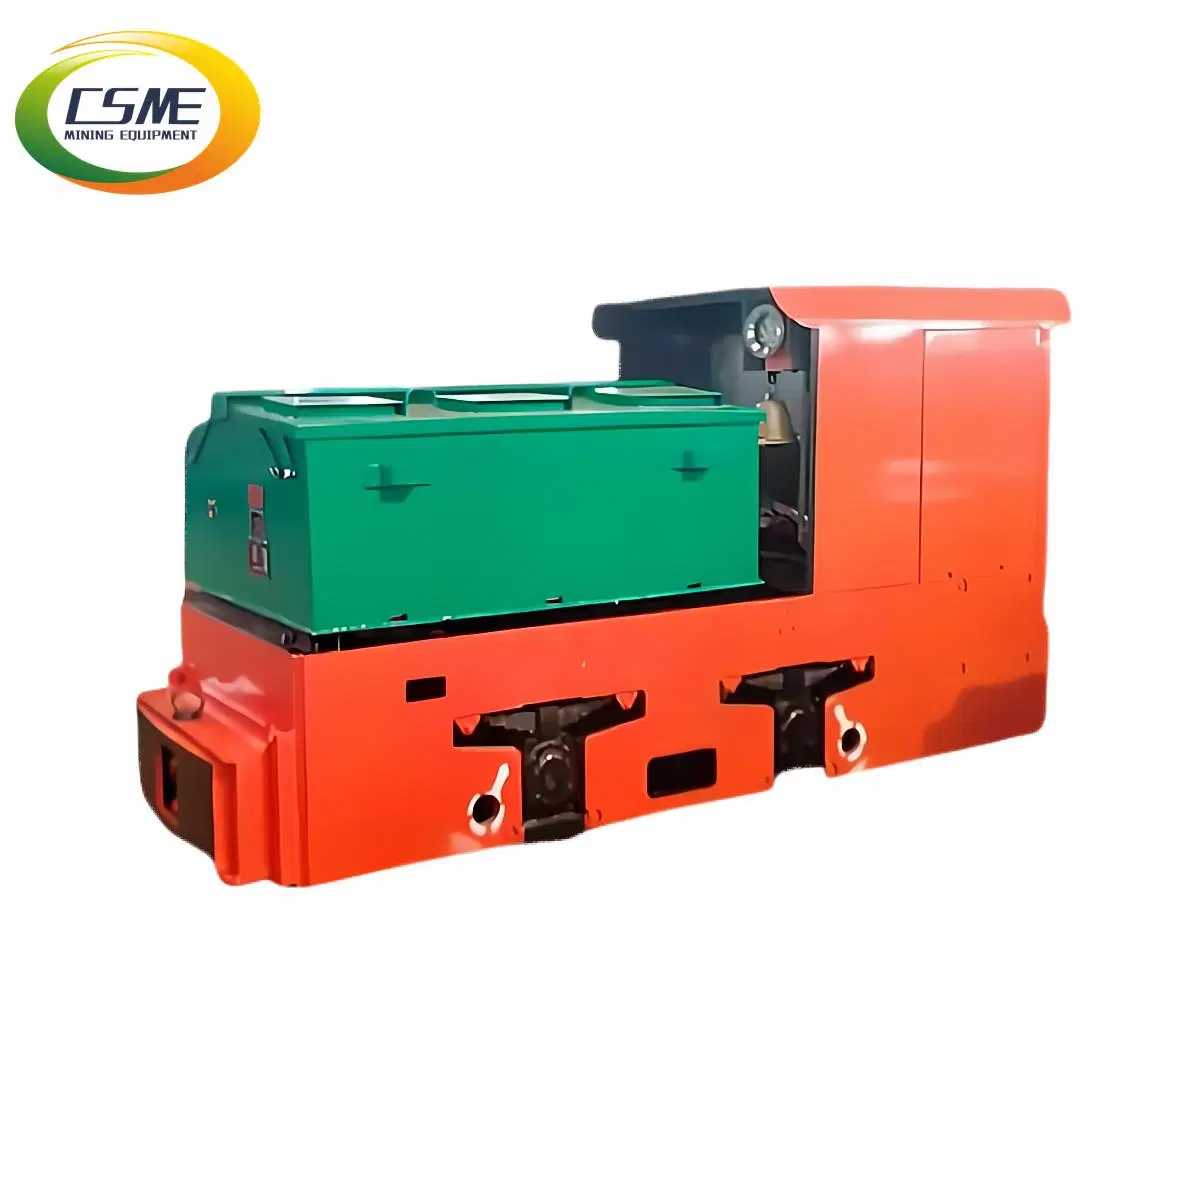 Cty5 Battery Electric Locomotive for Underground Mining